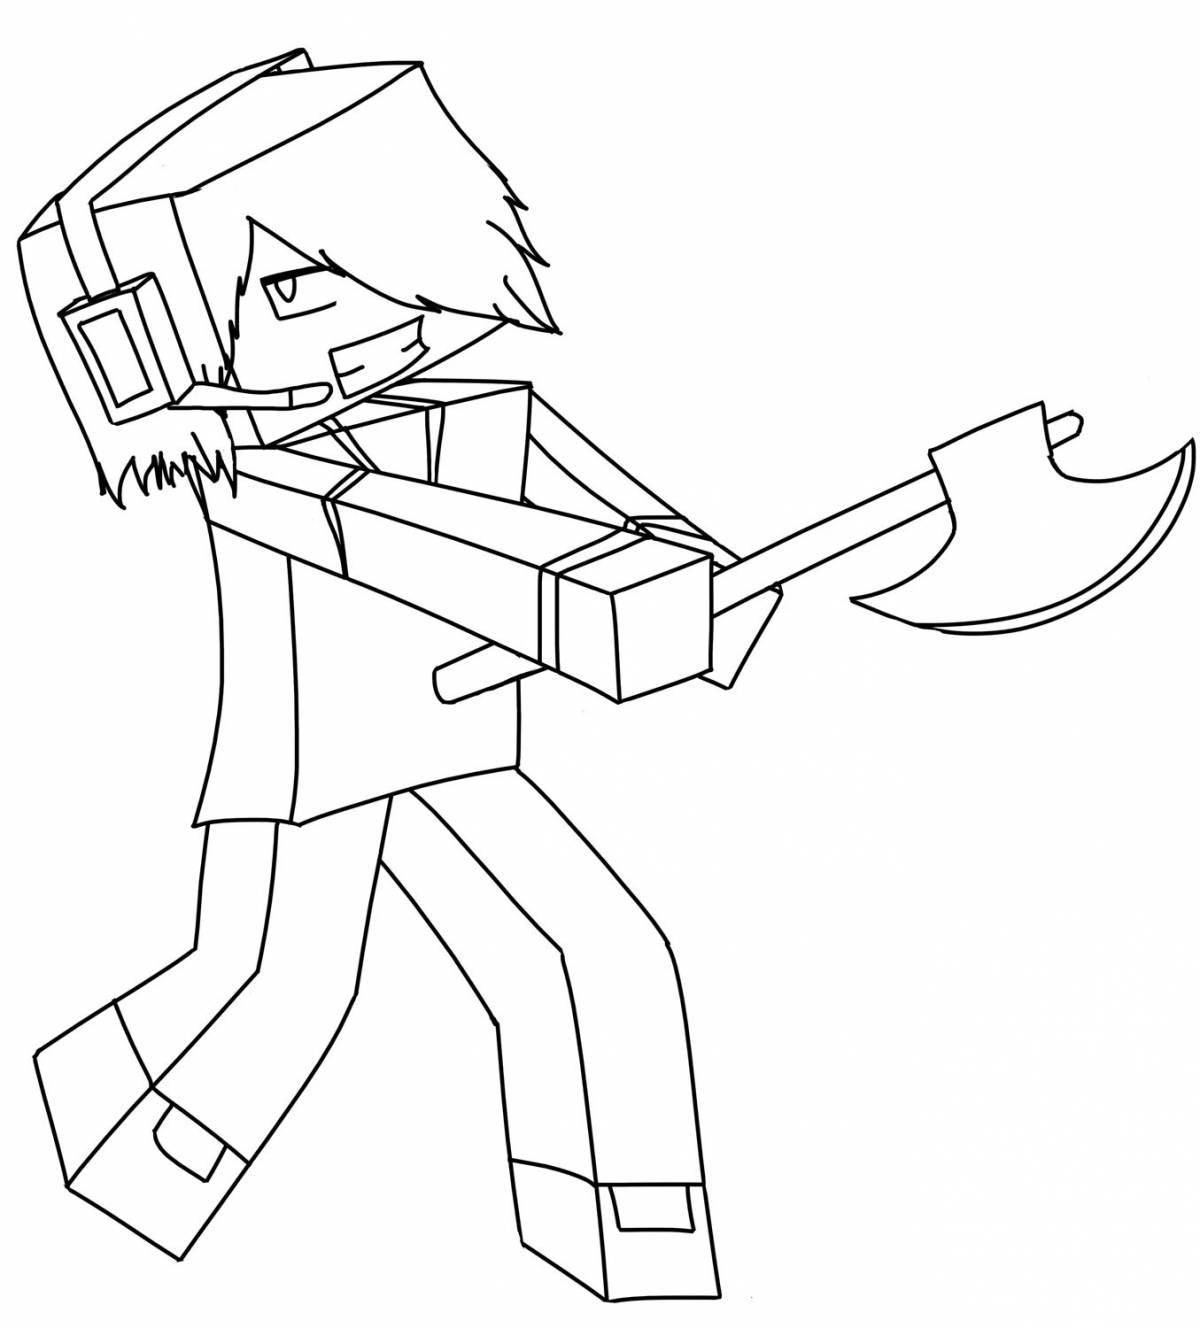 Coloring page for colorful minecraft characters